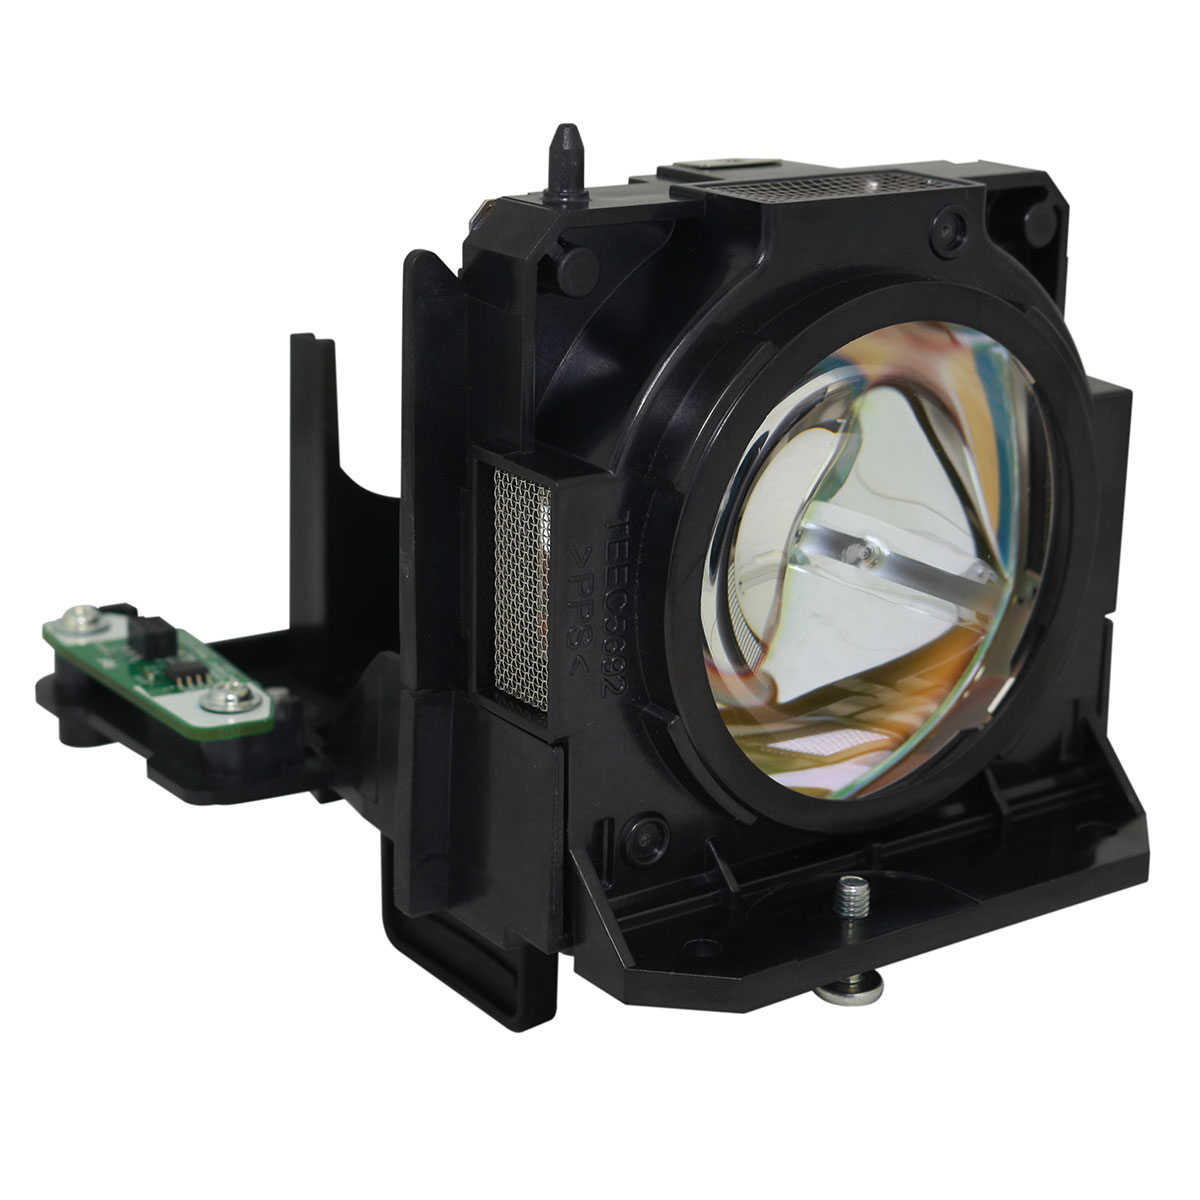 OEM ET-LAD70AW Lamp & Housing Twinpack for Panasonic Projectors - 1 Year Jaspertronics Full Support Warranty! - image 5 of 9